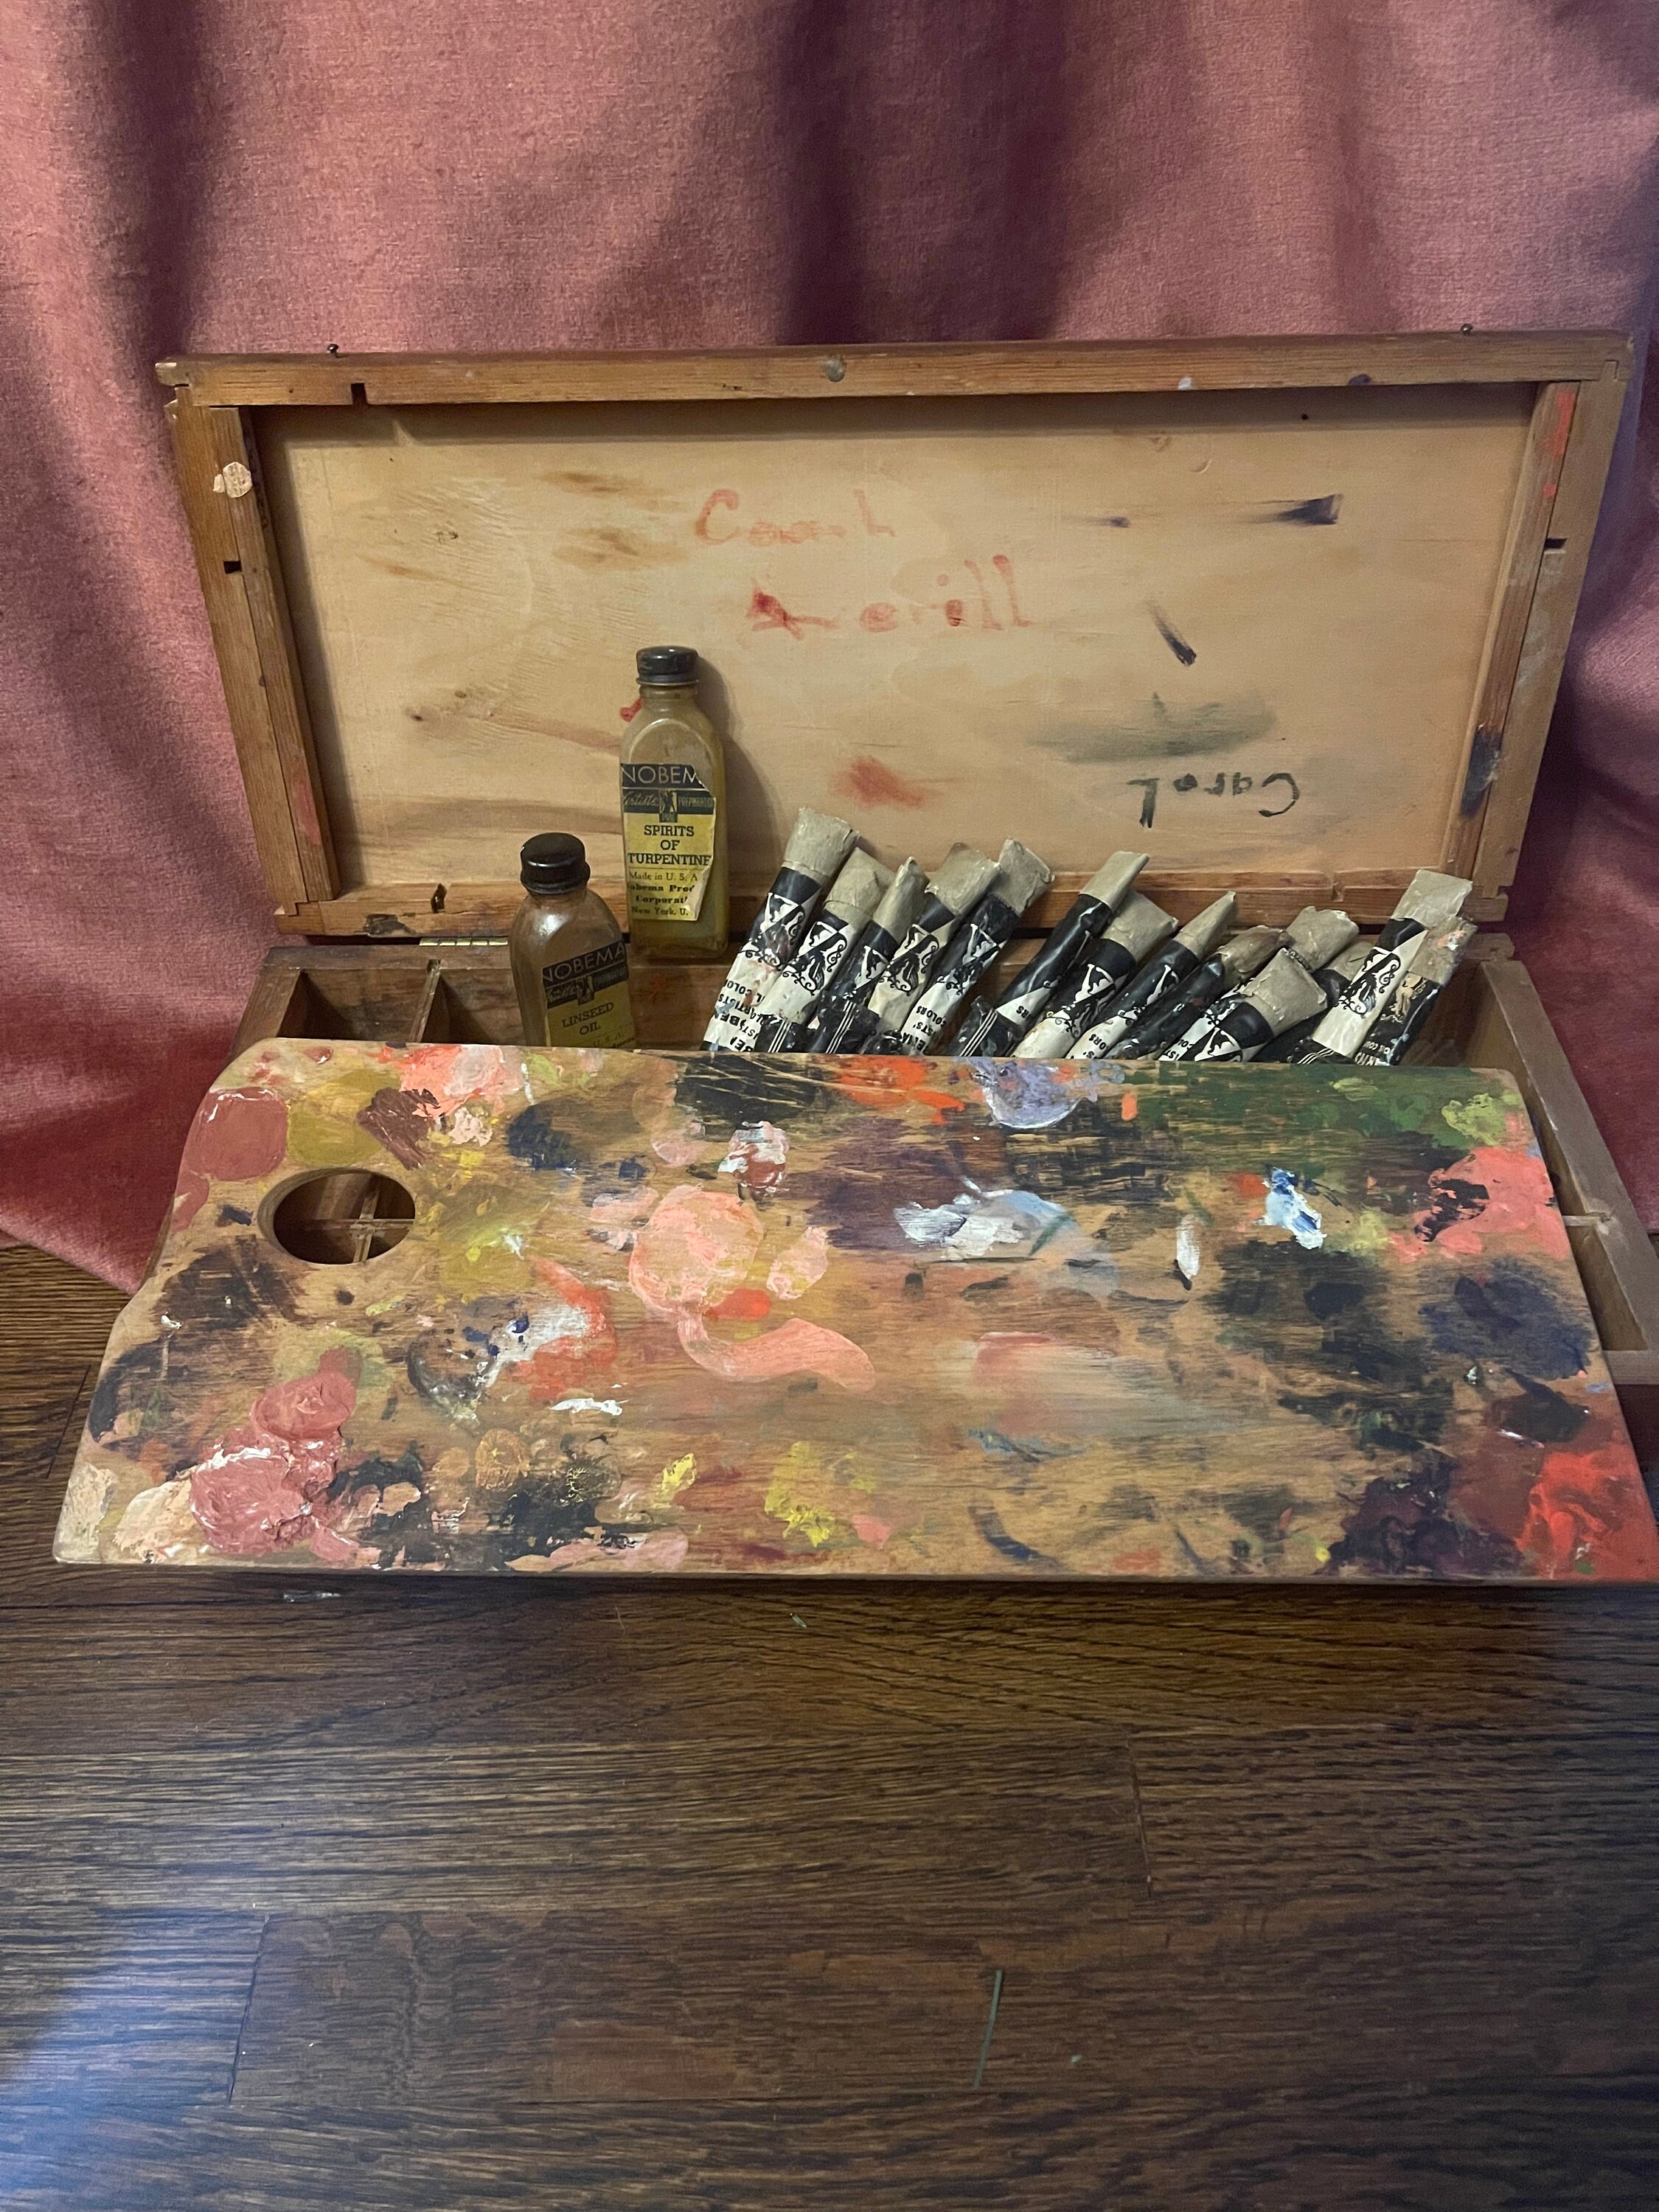 Vintage Wooden Artist Traveling Paint Box, Antique Paint Box, Large Artist  Box Art Supplies Drawing Painting Calligraphy 